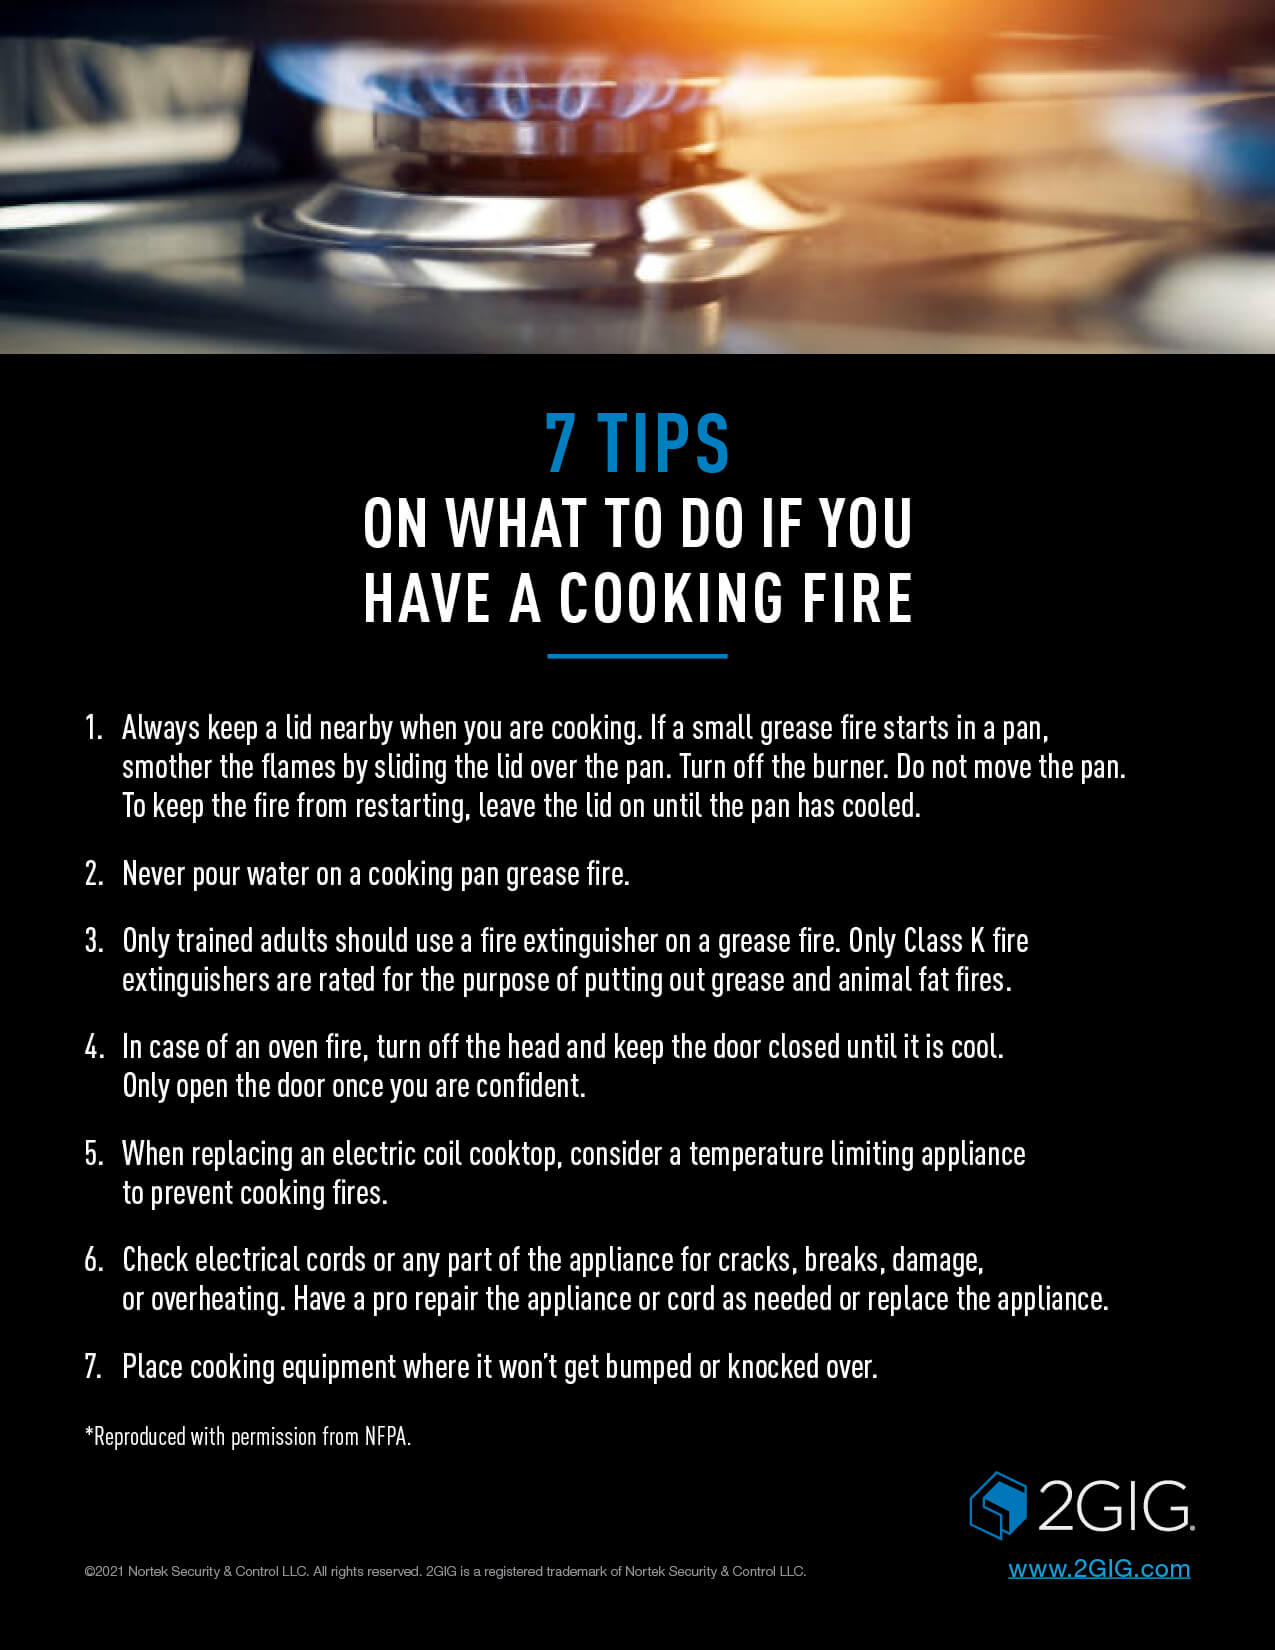 What do if you have a cooking fire